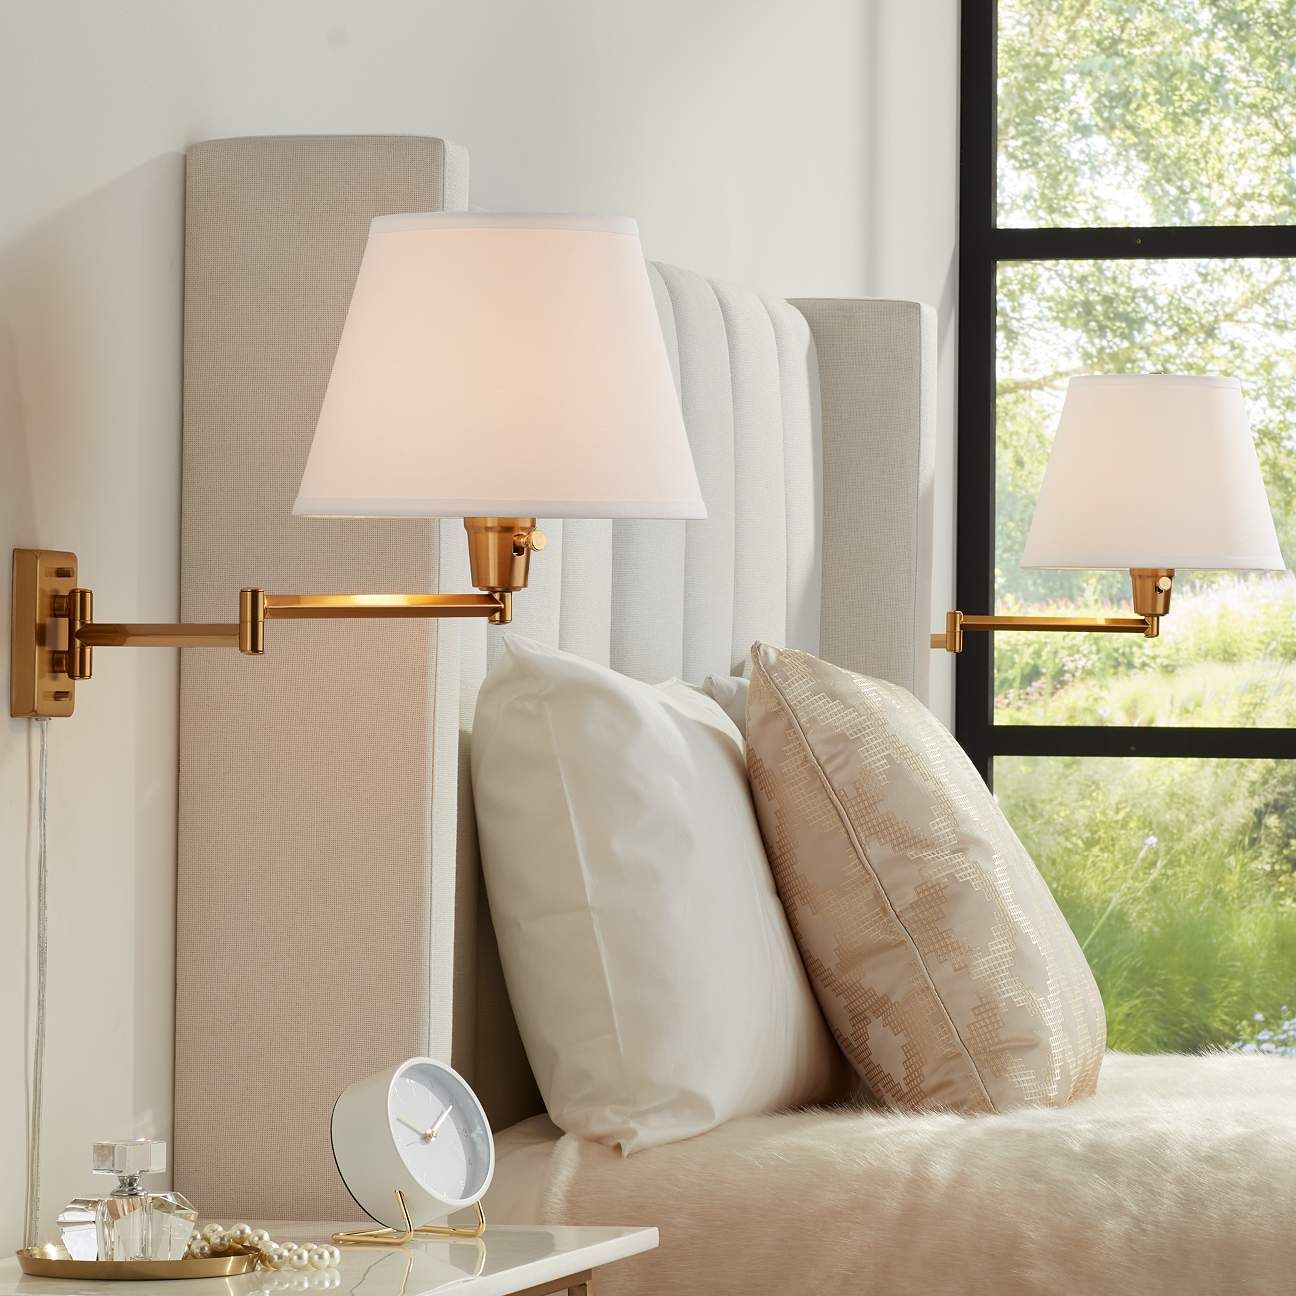 Clement Warm Gold Swing Arm Plug-In Wall Lamps Set of 2 | Lamps Plus